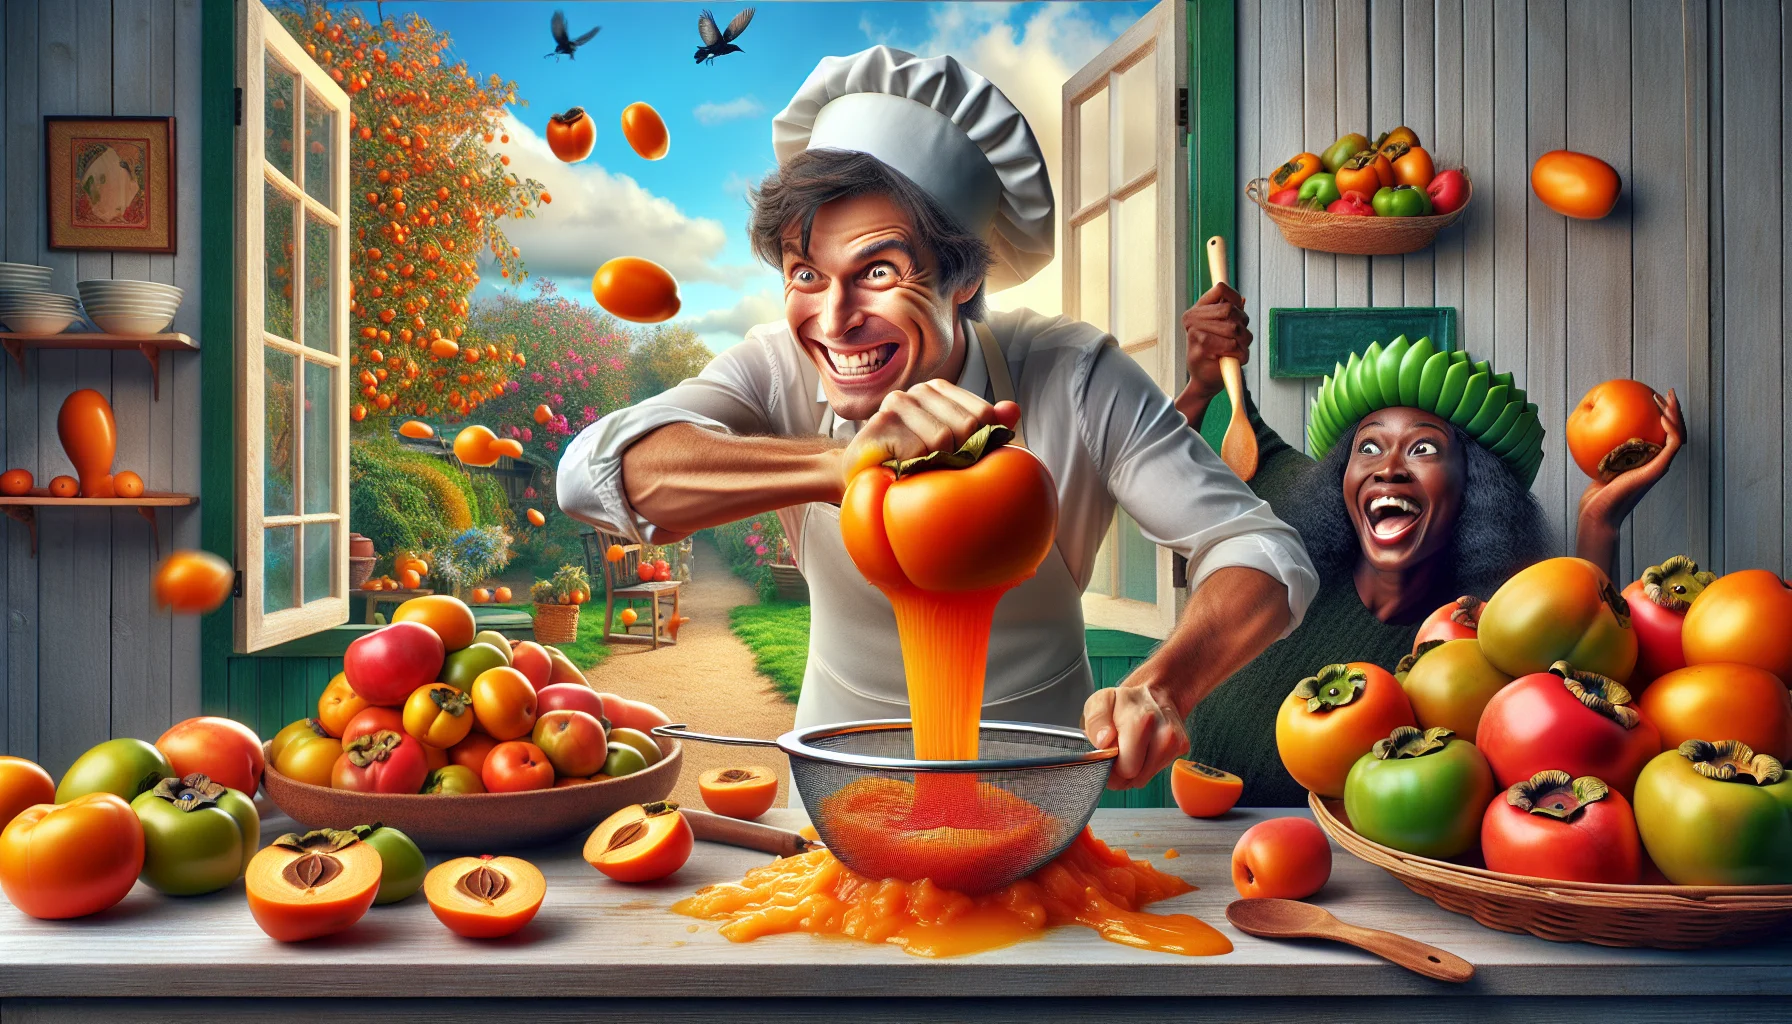 Create a vibrant and humorous image of a bustling domestic kitchen. A Caucasian man wearing a white apron is standing at a counter covered in bright orange persimmons. He's grinning widely, squeezing a ripe persimmon in a sieve making pulp, with some juice comically squirting to his side. A Black woman, wearing a green hat resembling a leaf, is giggling nearby, holding a wooden spoon. The colorful vegetables fresh from the garden are peeking from a basket on the floor. In the background, through an open window, a flourishing garden with persimmon trees can be glimpsed with petite birds fluttering about.